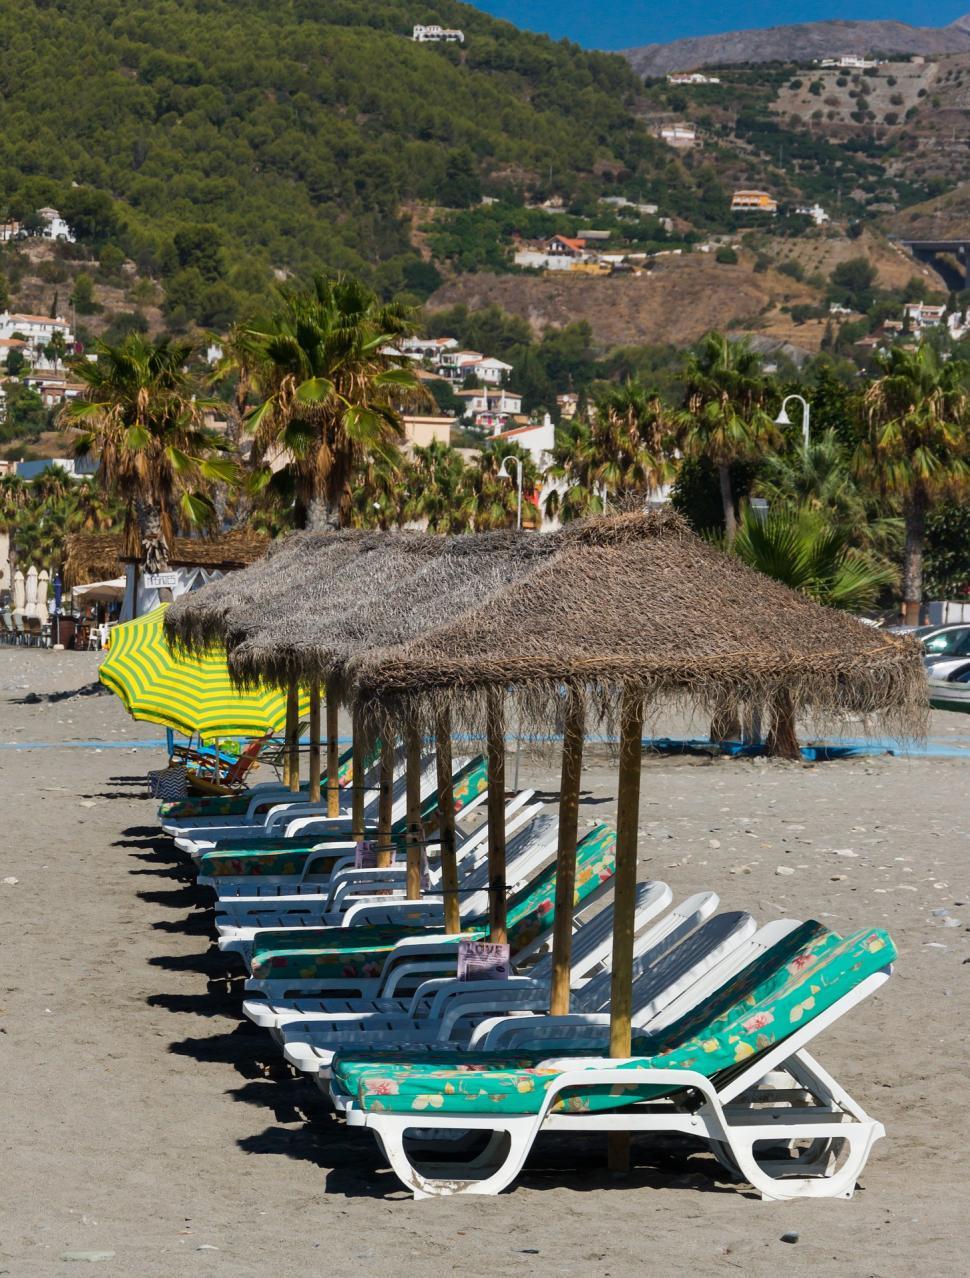 Free Image of Row of Lawn Chairs on Sandy Beach 